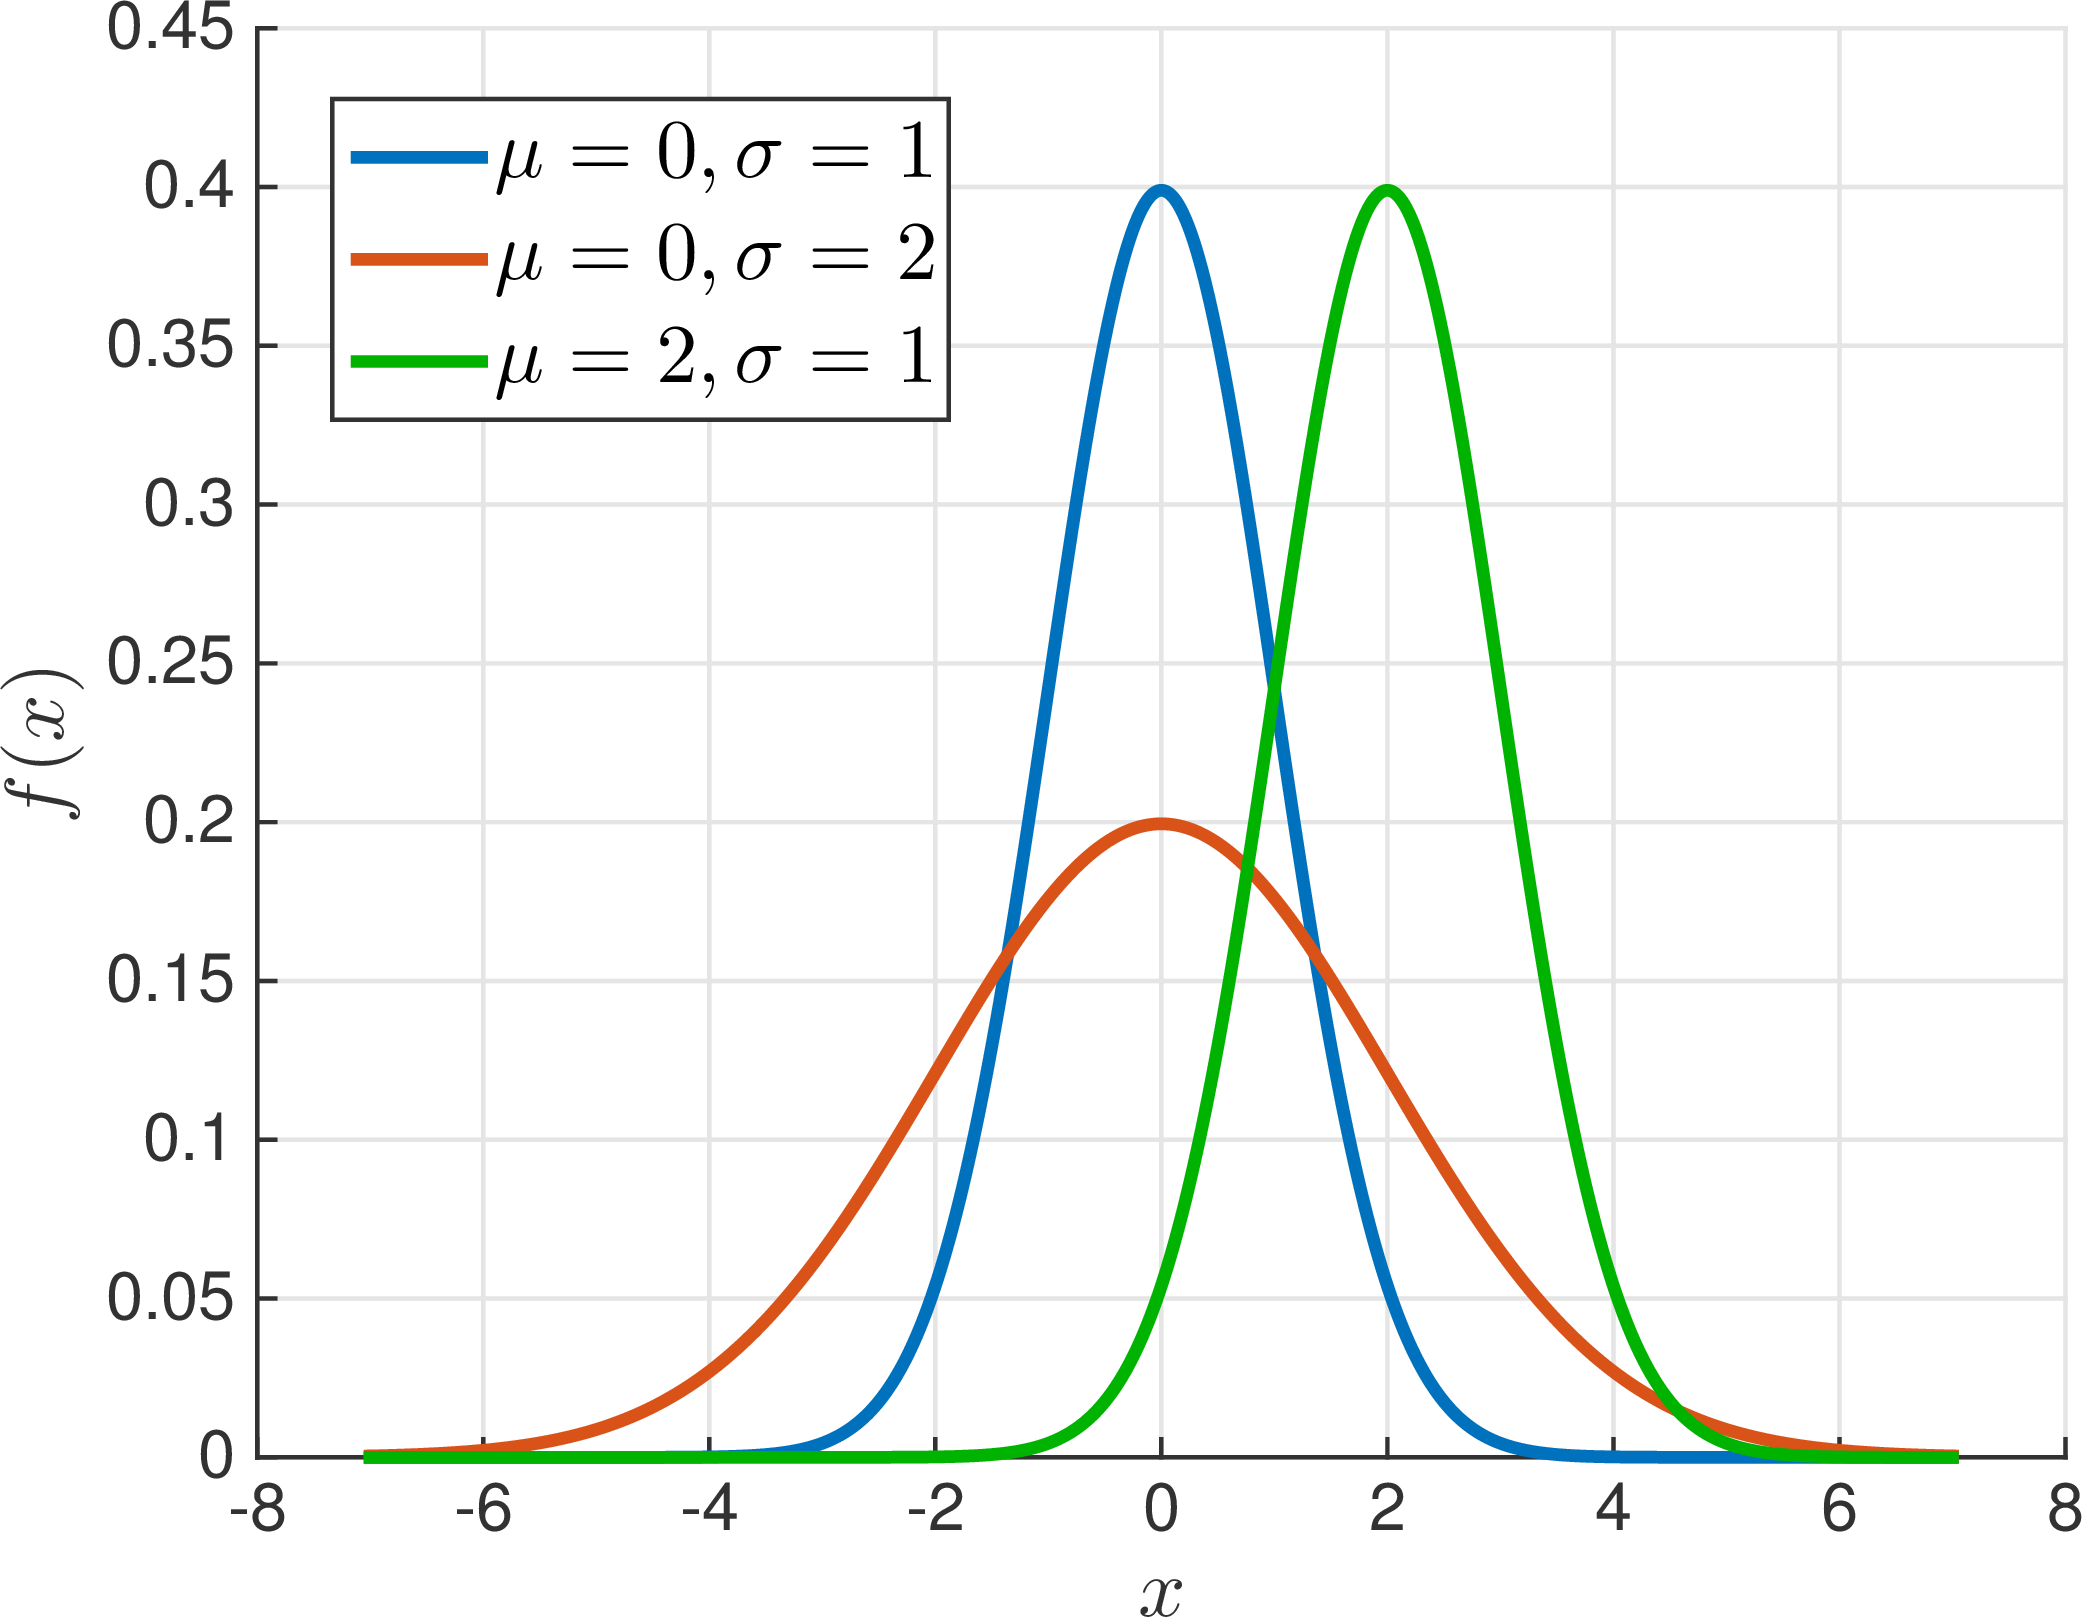 Figure 2: The density function for the normal distribution with several different choices for \mu and \sigma.